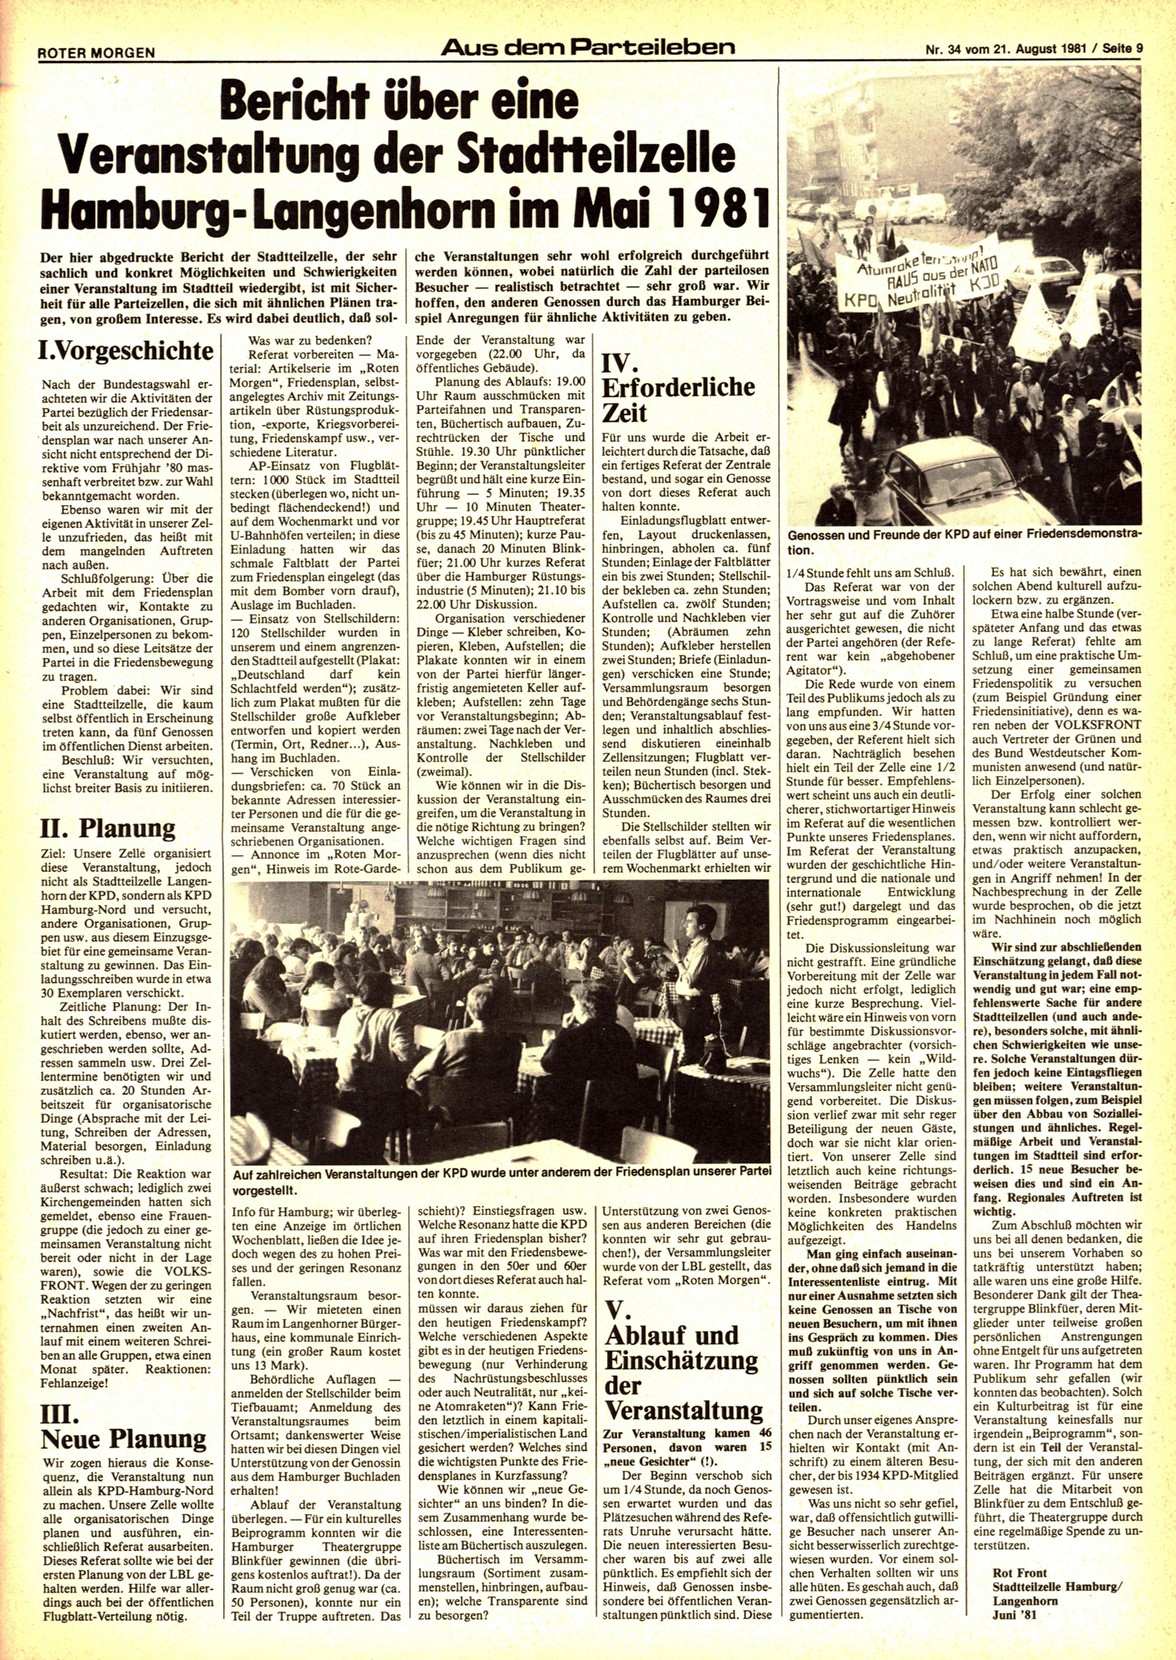 Roter Morgen, 15. Jg., 21. August 1981, Nr. 34, Seite 9